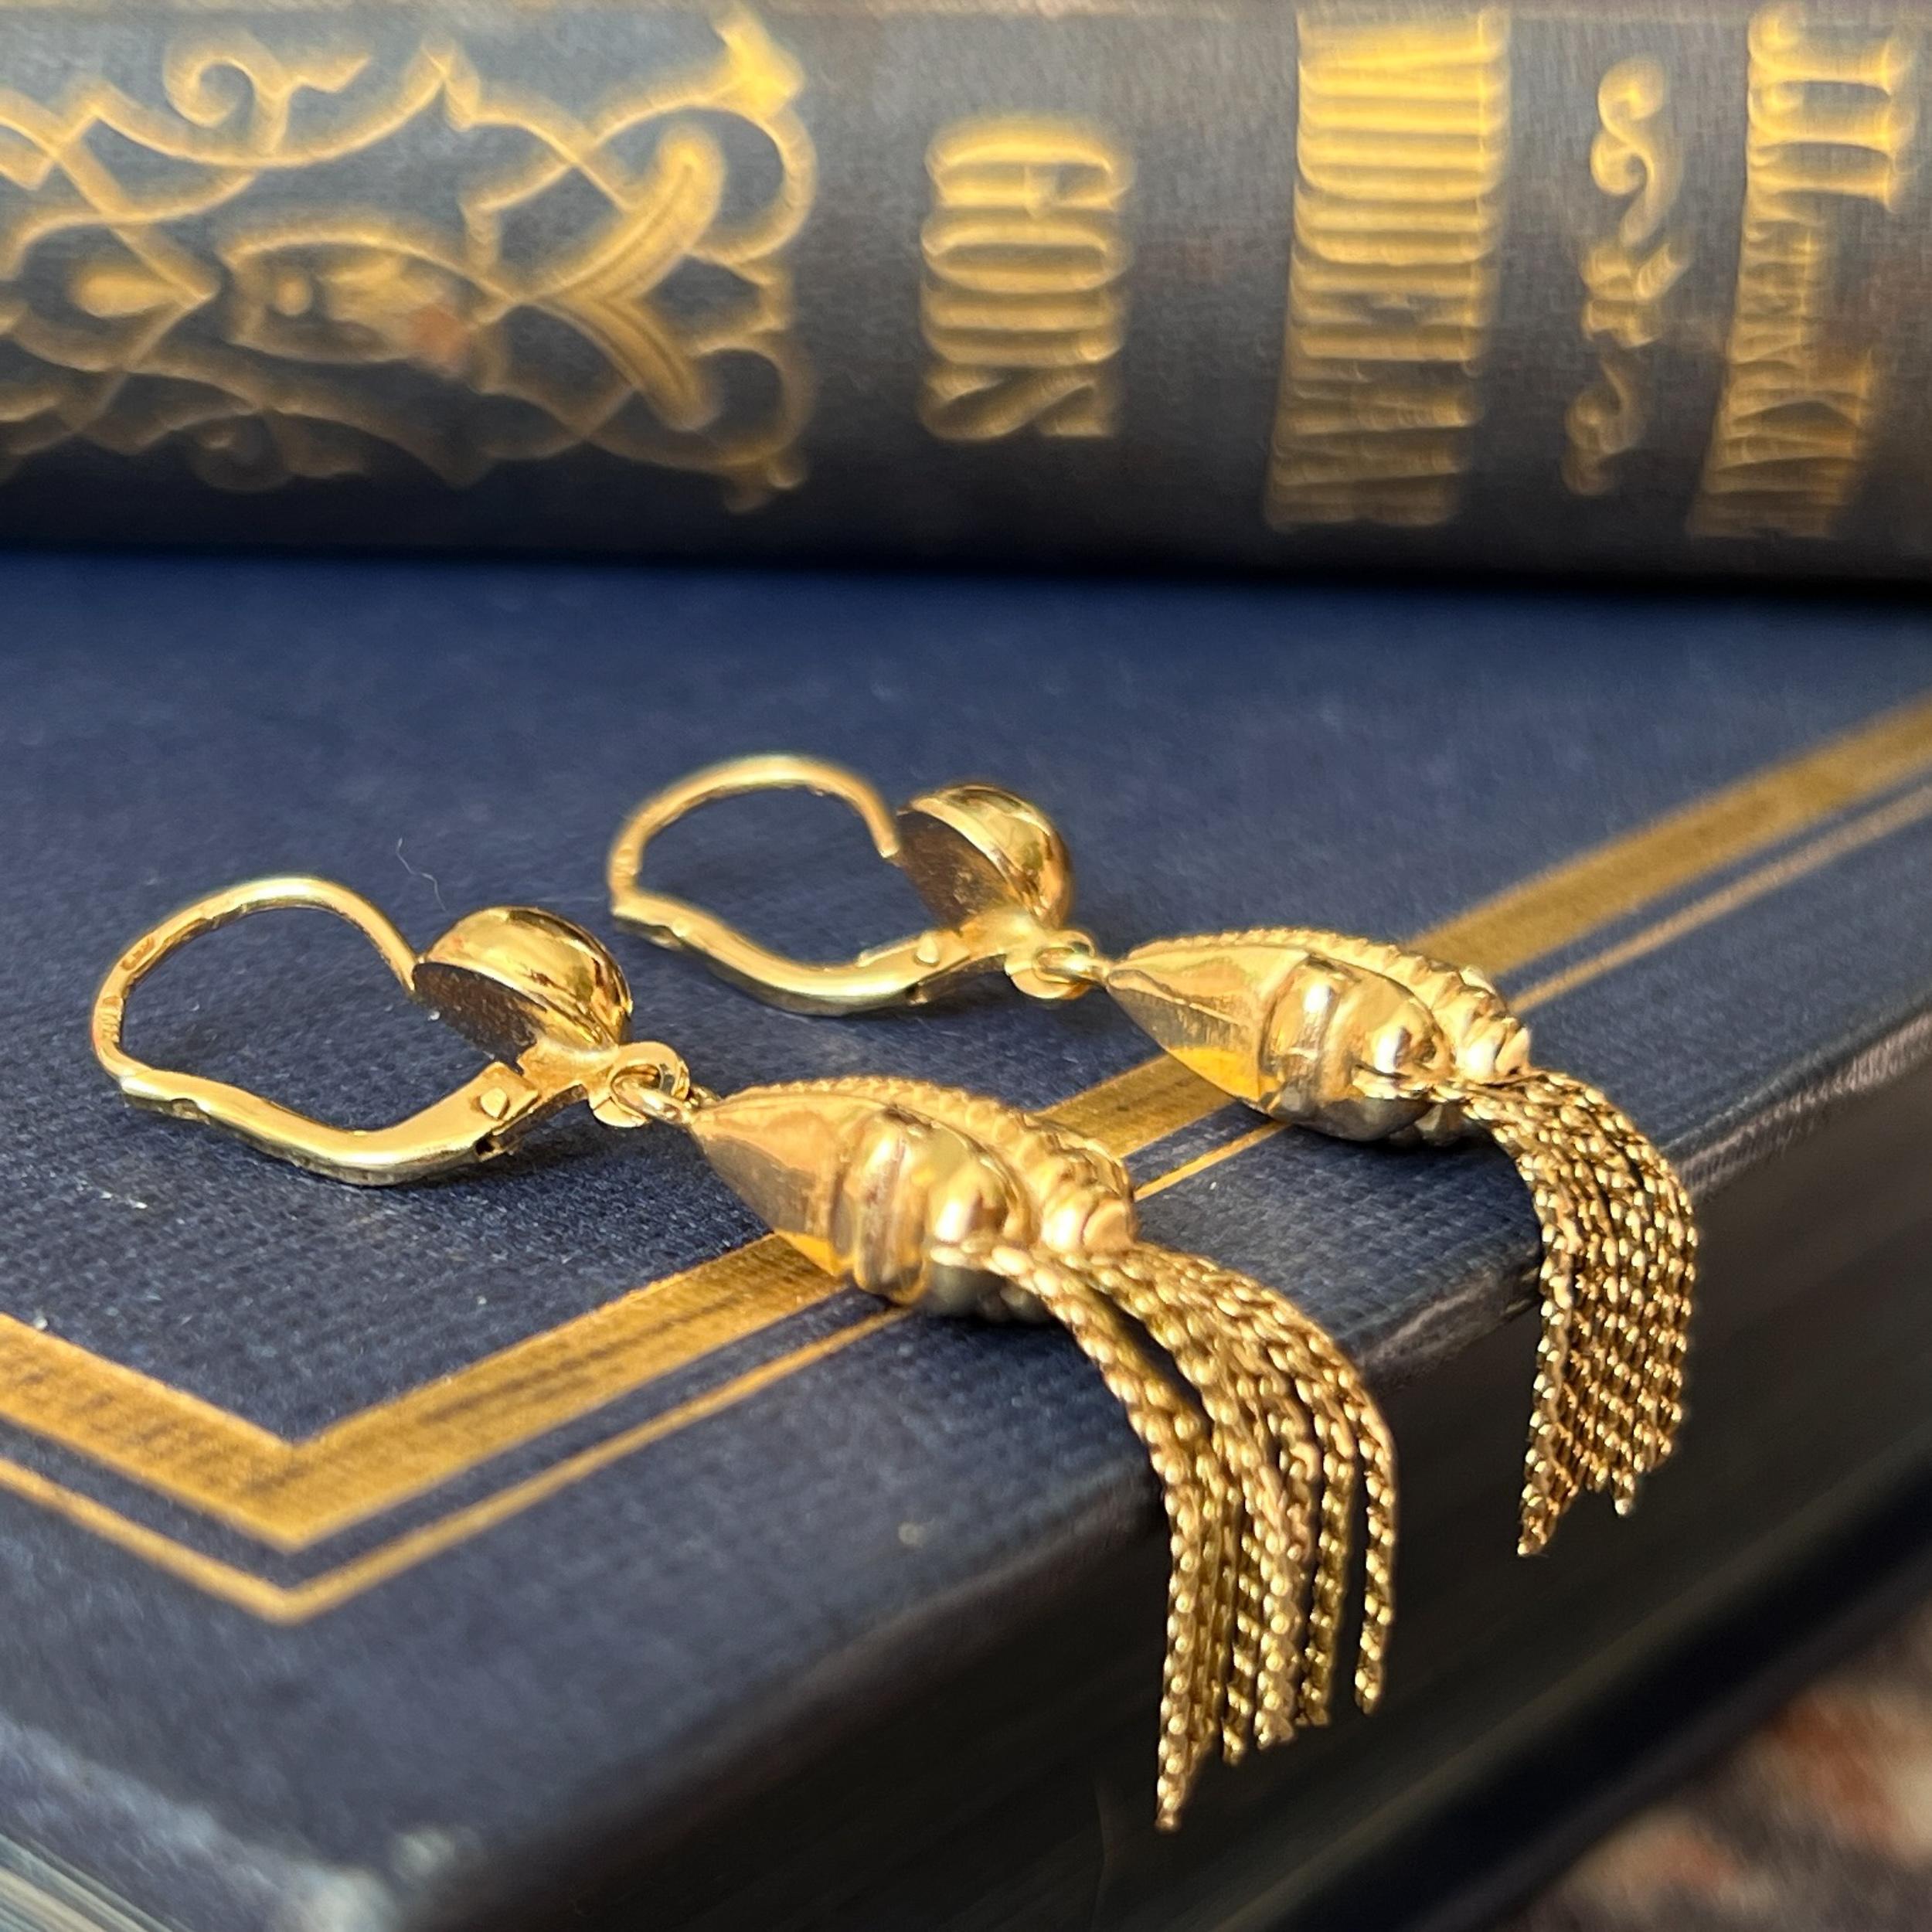 A pair of Art Deco tassel dangle earrings created in 18 karat yellow gold. The earrings are beautifully detailed with a scrolling design on the front and back side. The gold is embellished with vertical ribbed motifs in the center. Below the top the